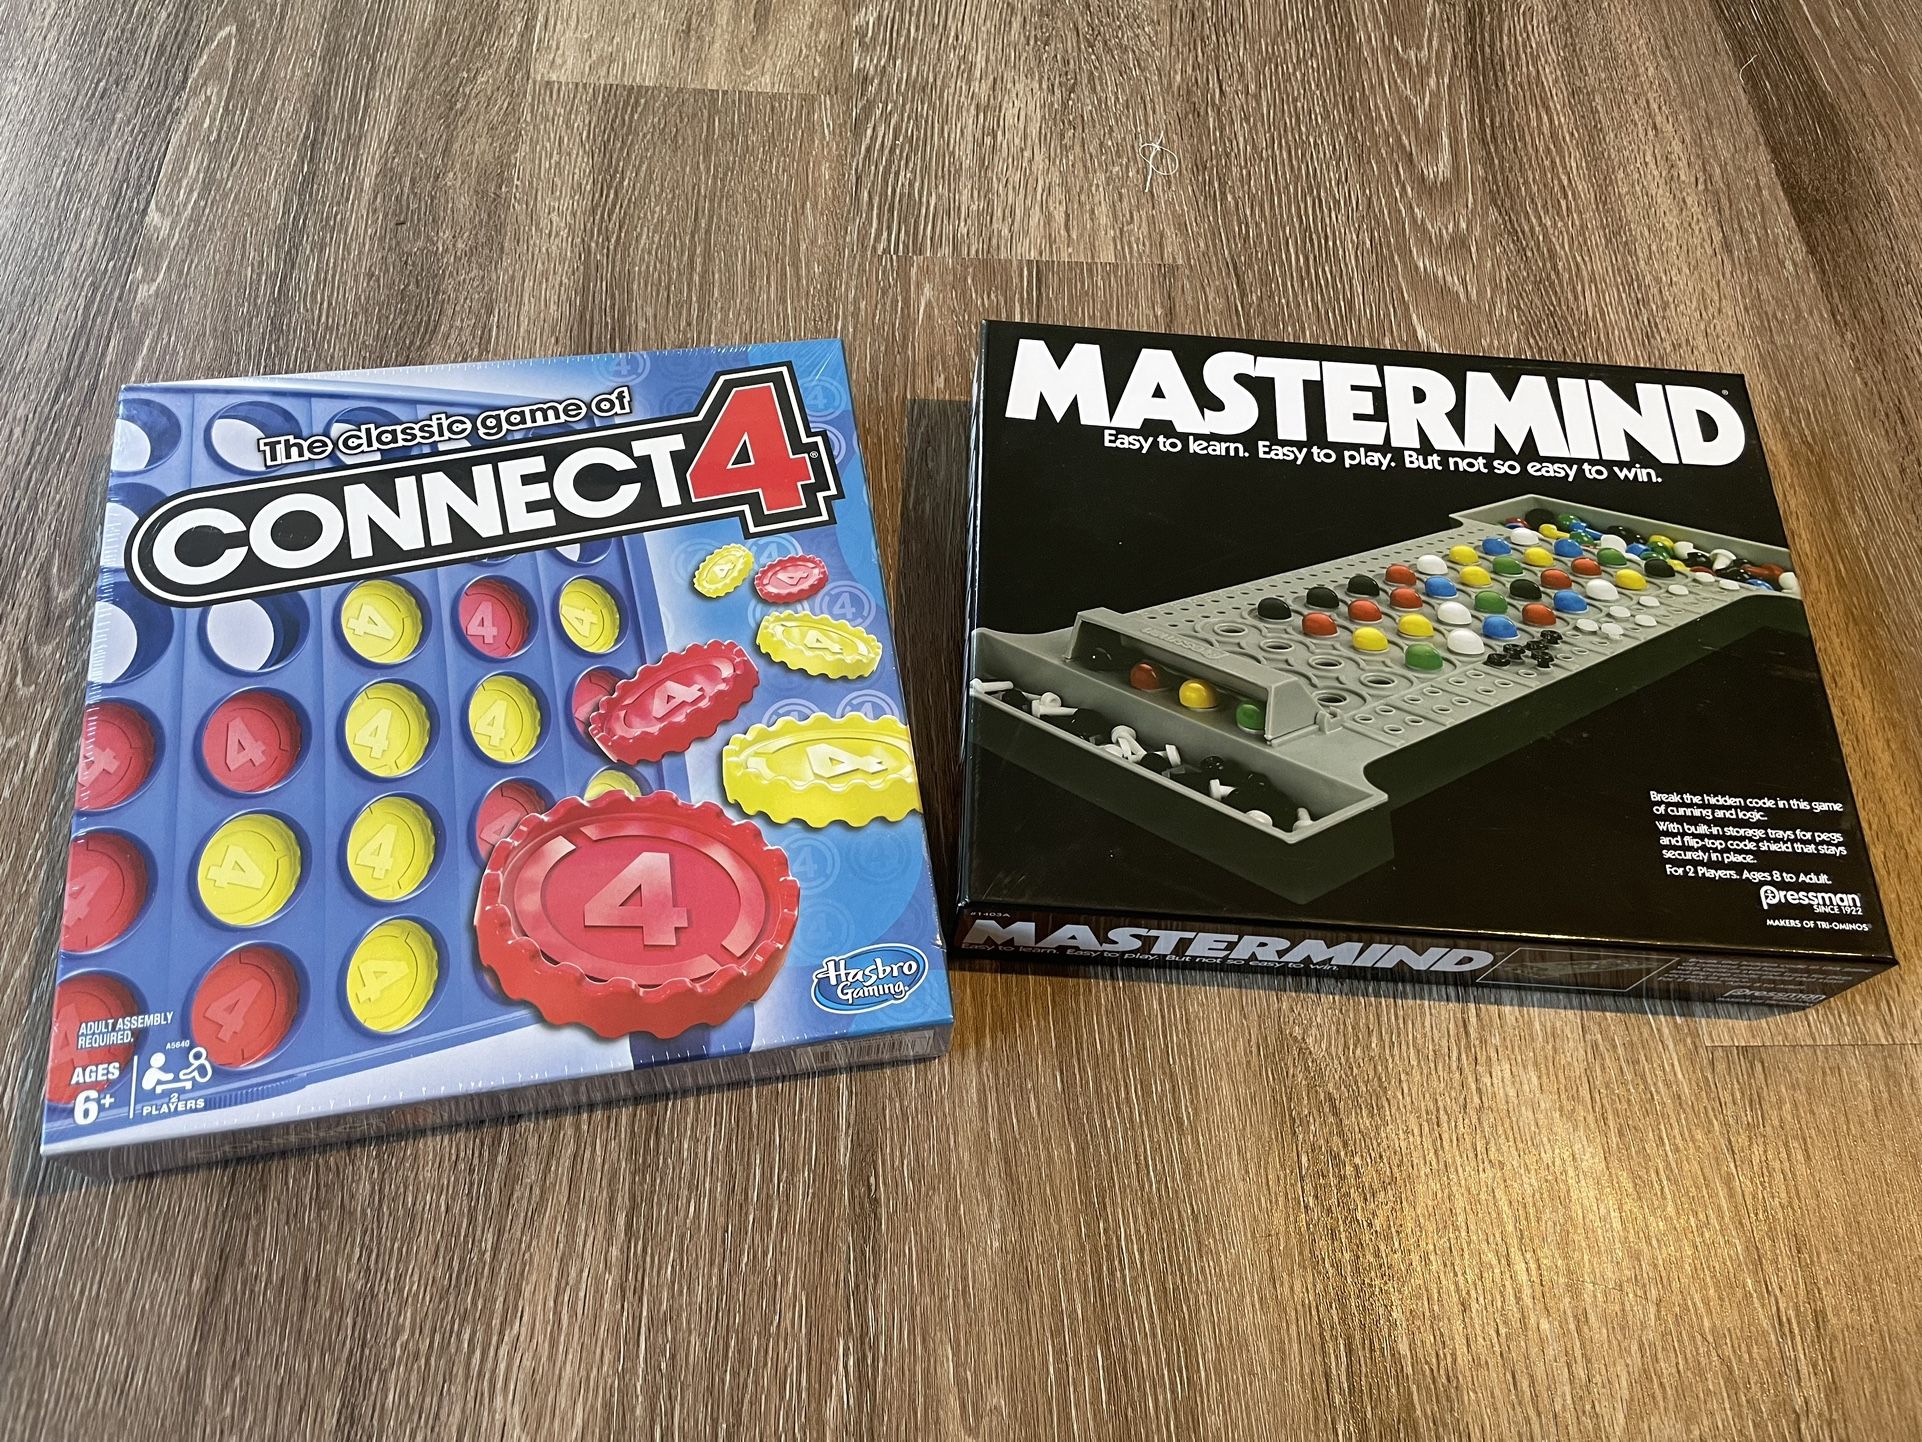 Connect 4 and Mastermind classic board games (unopened)